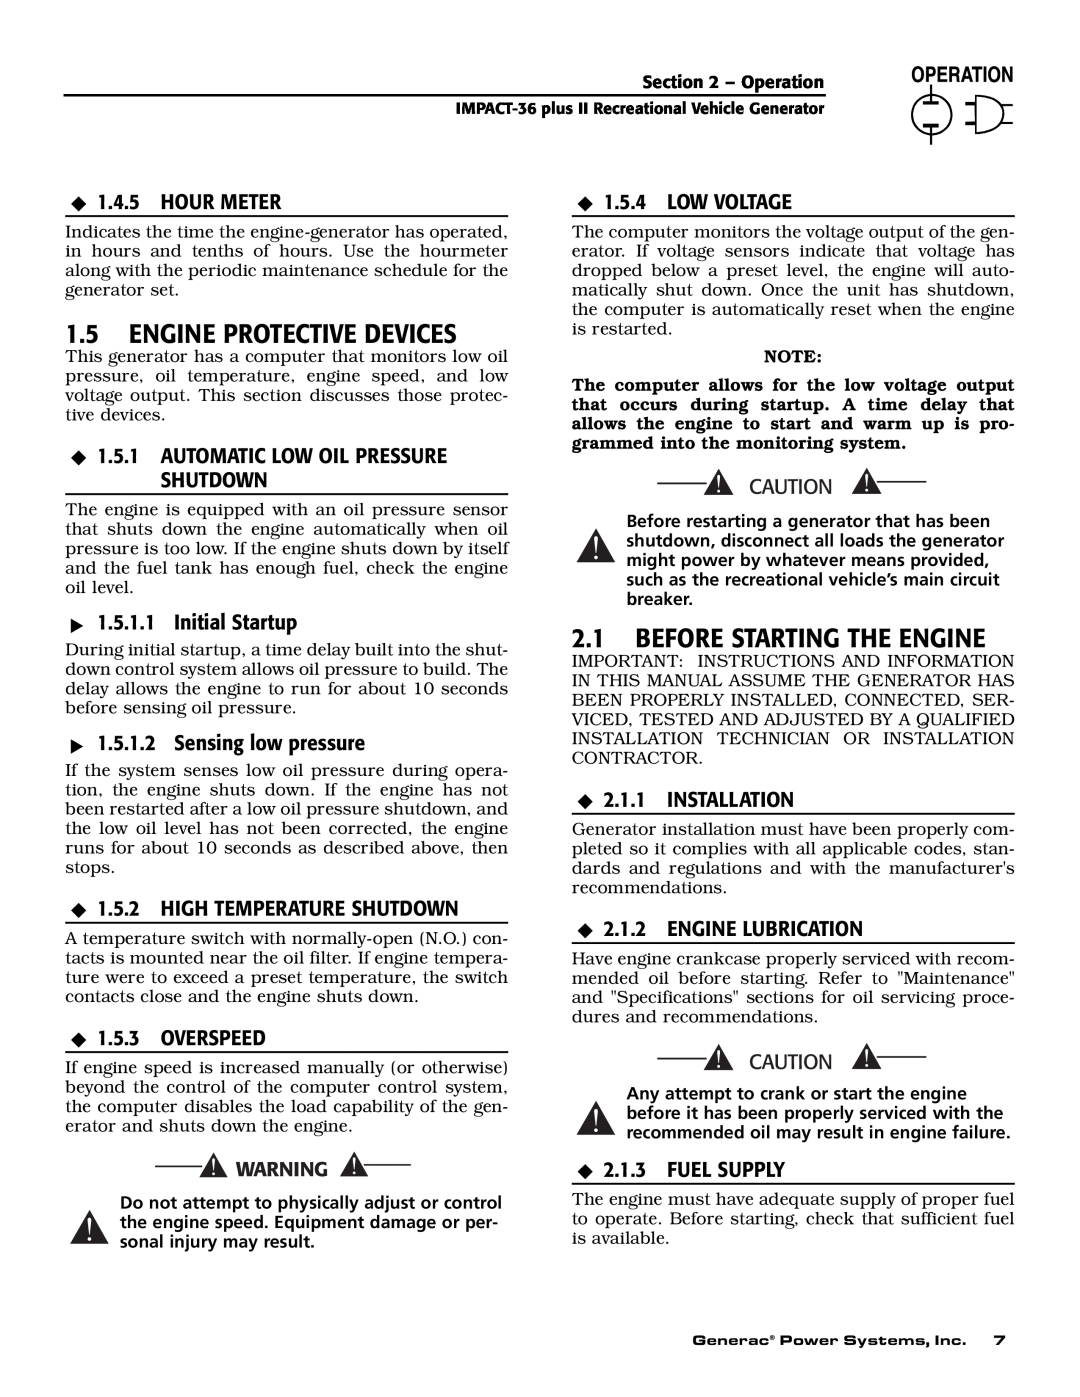 Generac 00941-3 owner manual 1.5ENGINE PROTECTIVE DEVICES, 2.1BEFORE STARTING THE ENGINE 